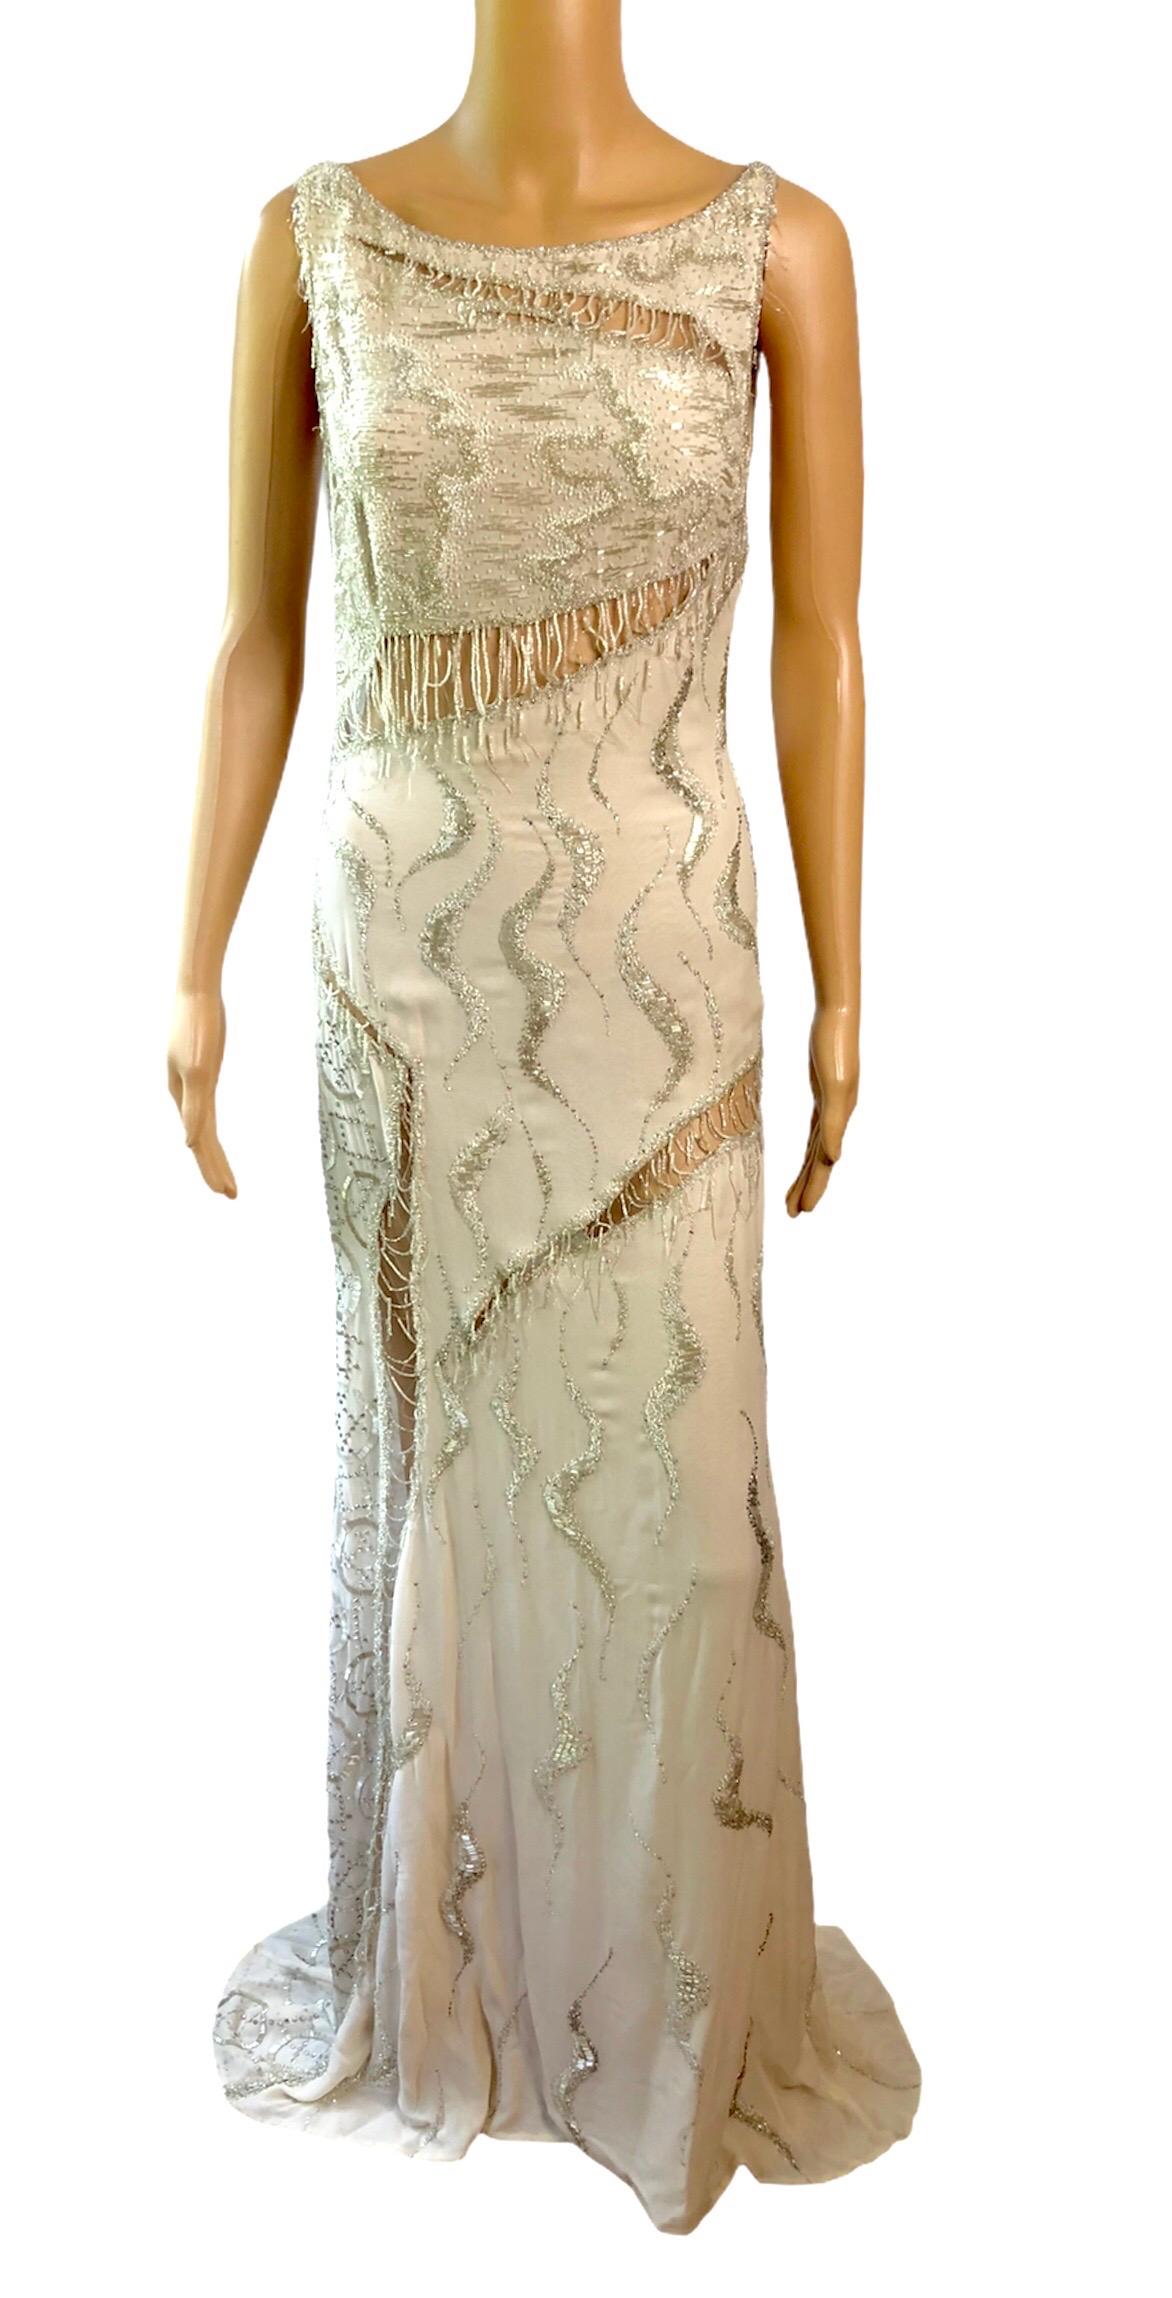 Atelier Versace Couture F/W 1998 Runway Embellished Sheer Cutout Gown Evening Dress IT 42

Seen on F/W 1998 Haute Couture Runway. Atelier Versace sleeveless maxi dress featuring bead and rhinestone embellishments, sheer cutouts, train at hem, and